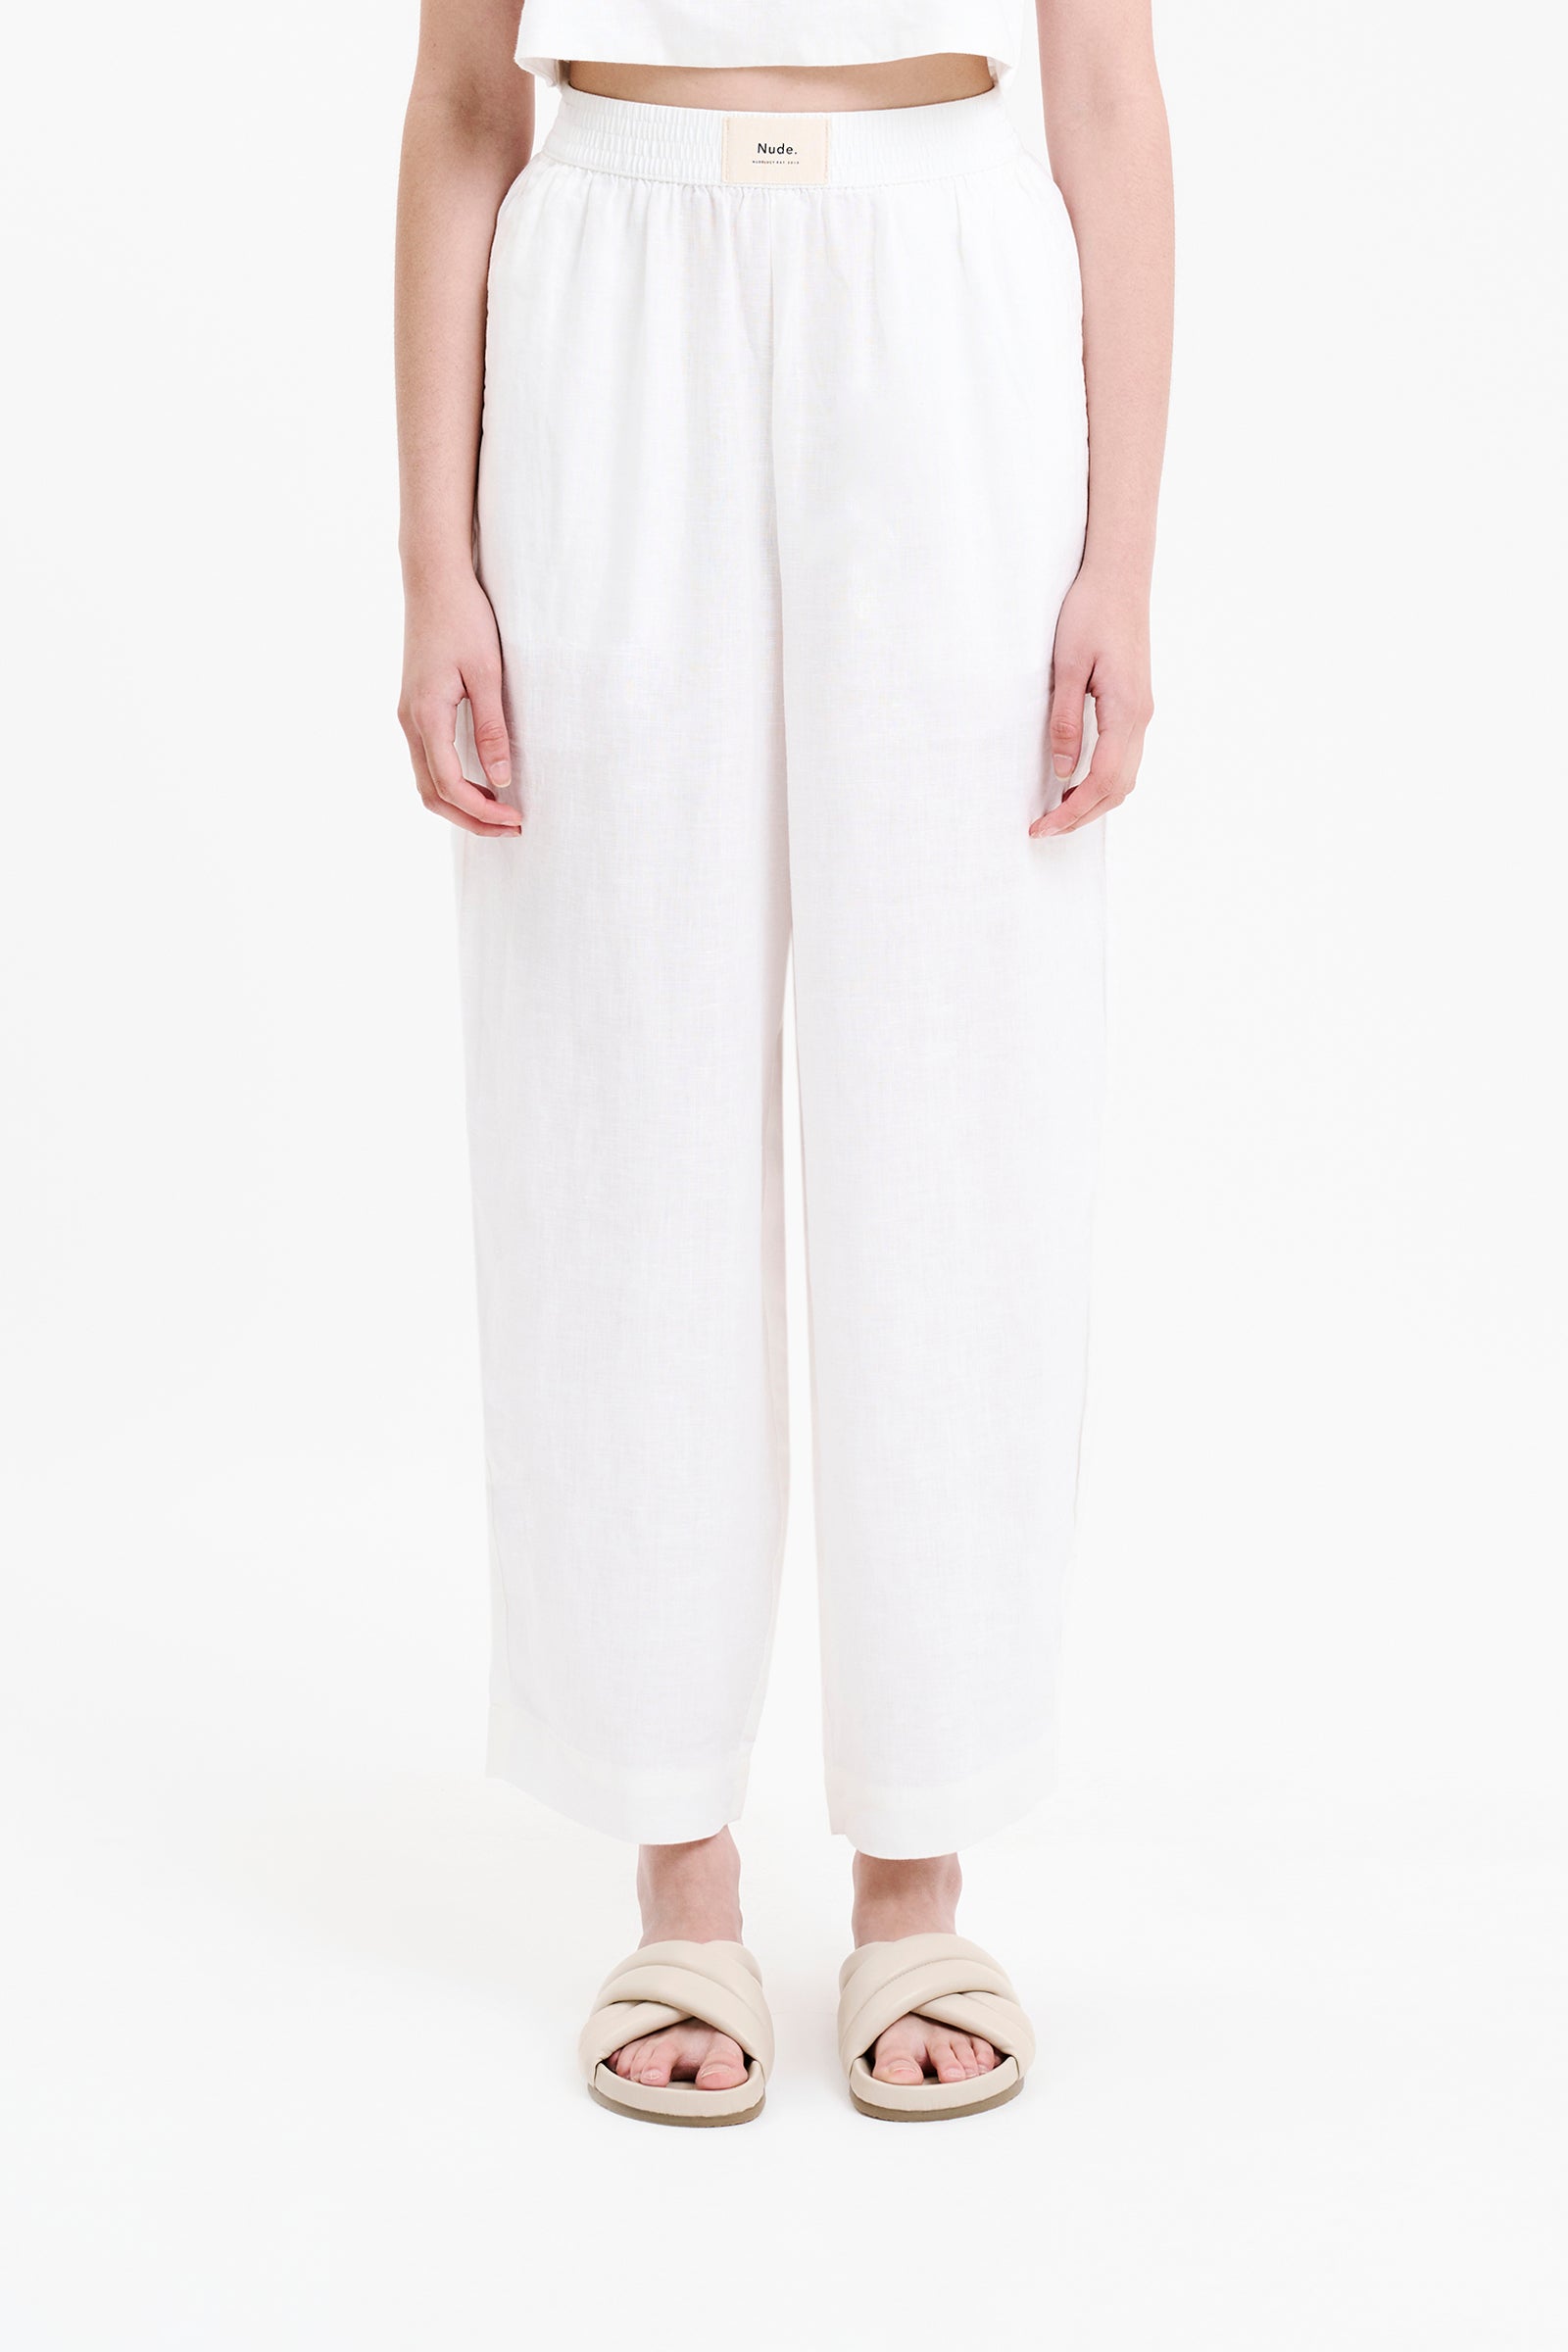 Nude Lucy Lounge Heritage Linen Pant In White 